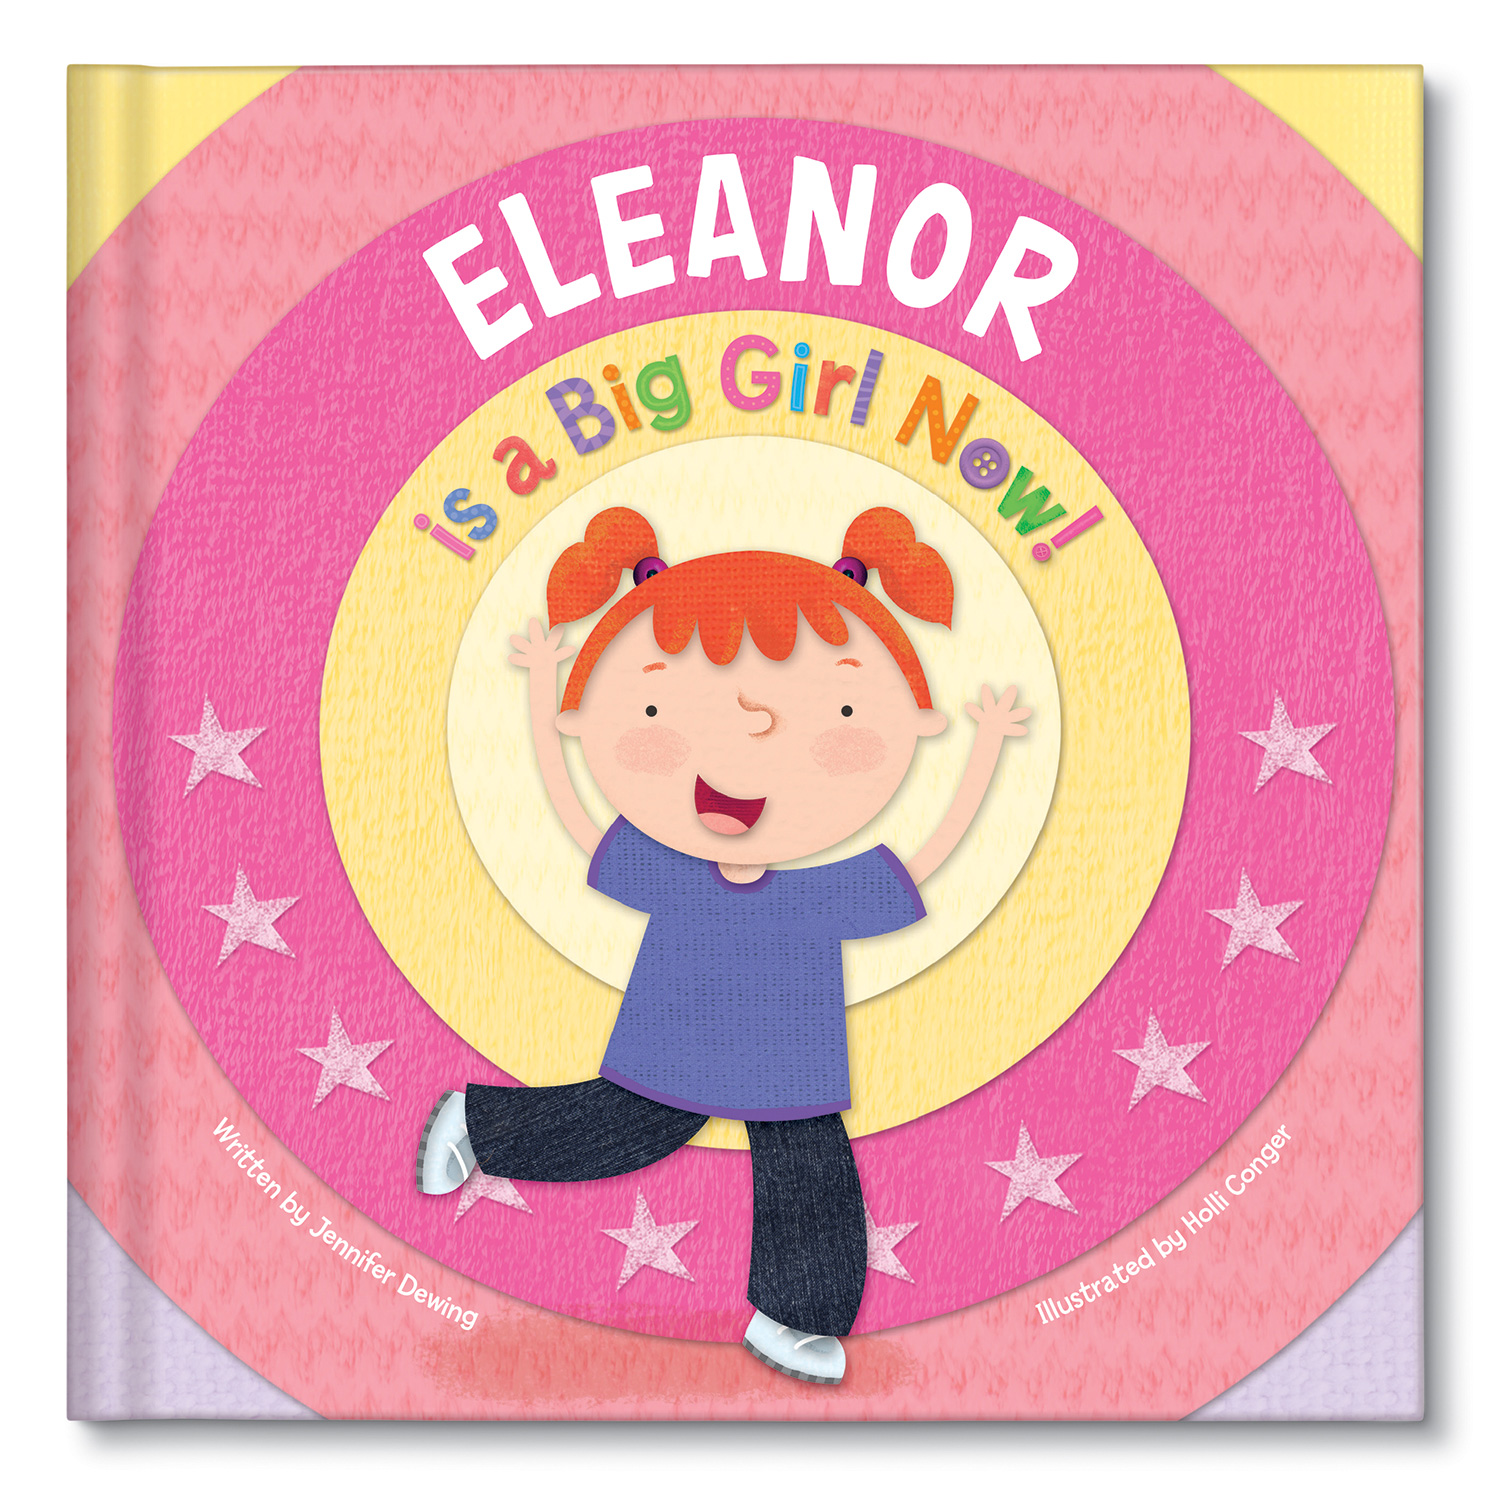 Parents can select their child's hair and skin color, so that the character resembles their child in I See Me!'s new personalized storybooks,  "I’m a Big Boy Now!" or "I’m a Big Girl Now!" .